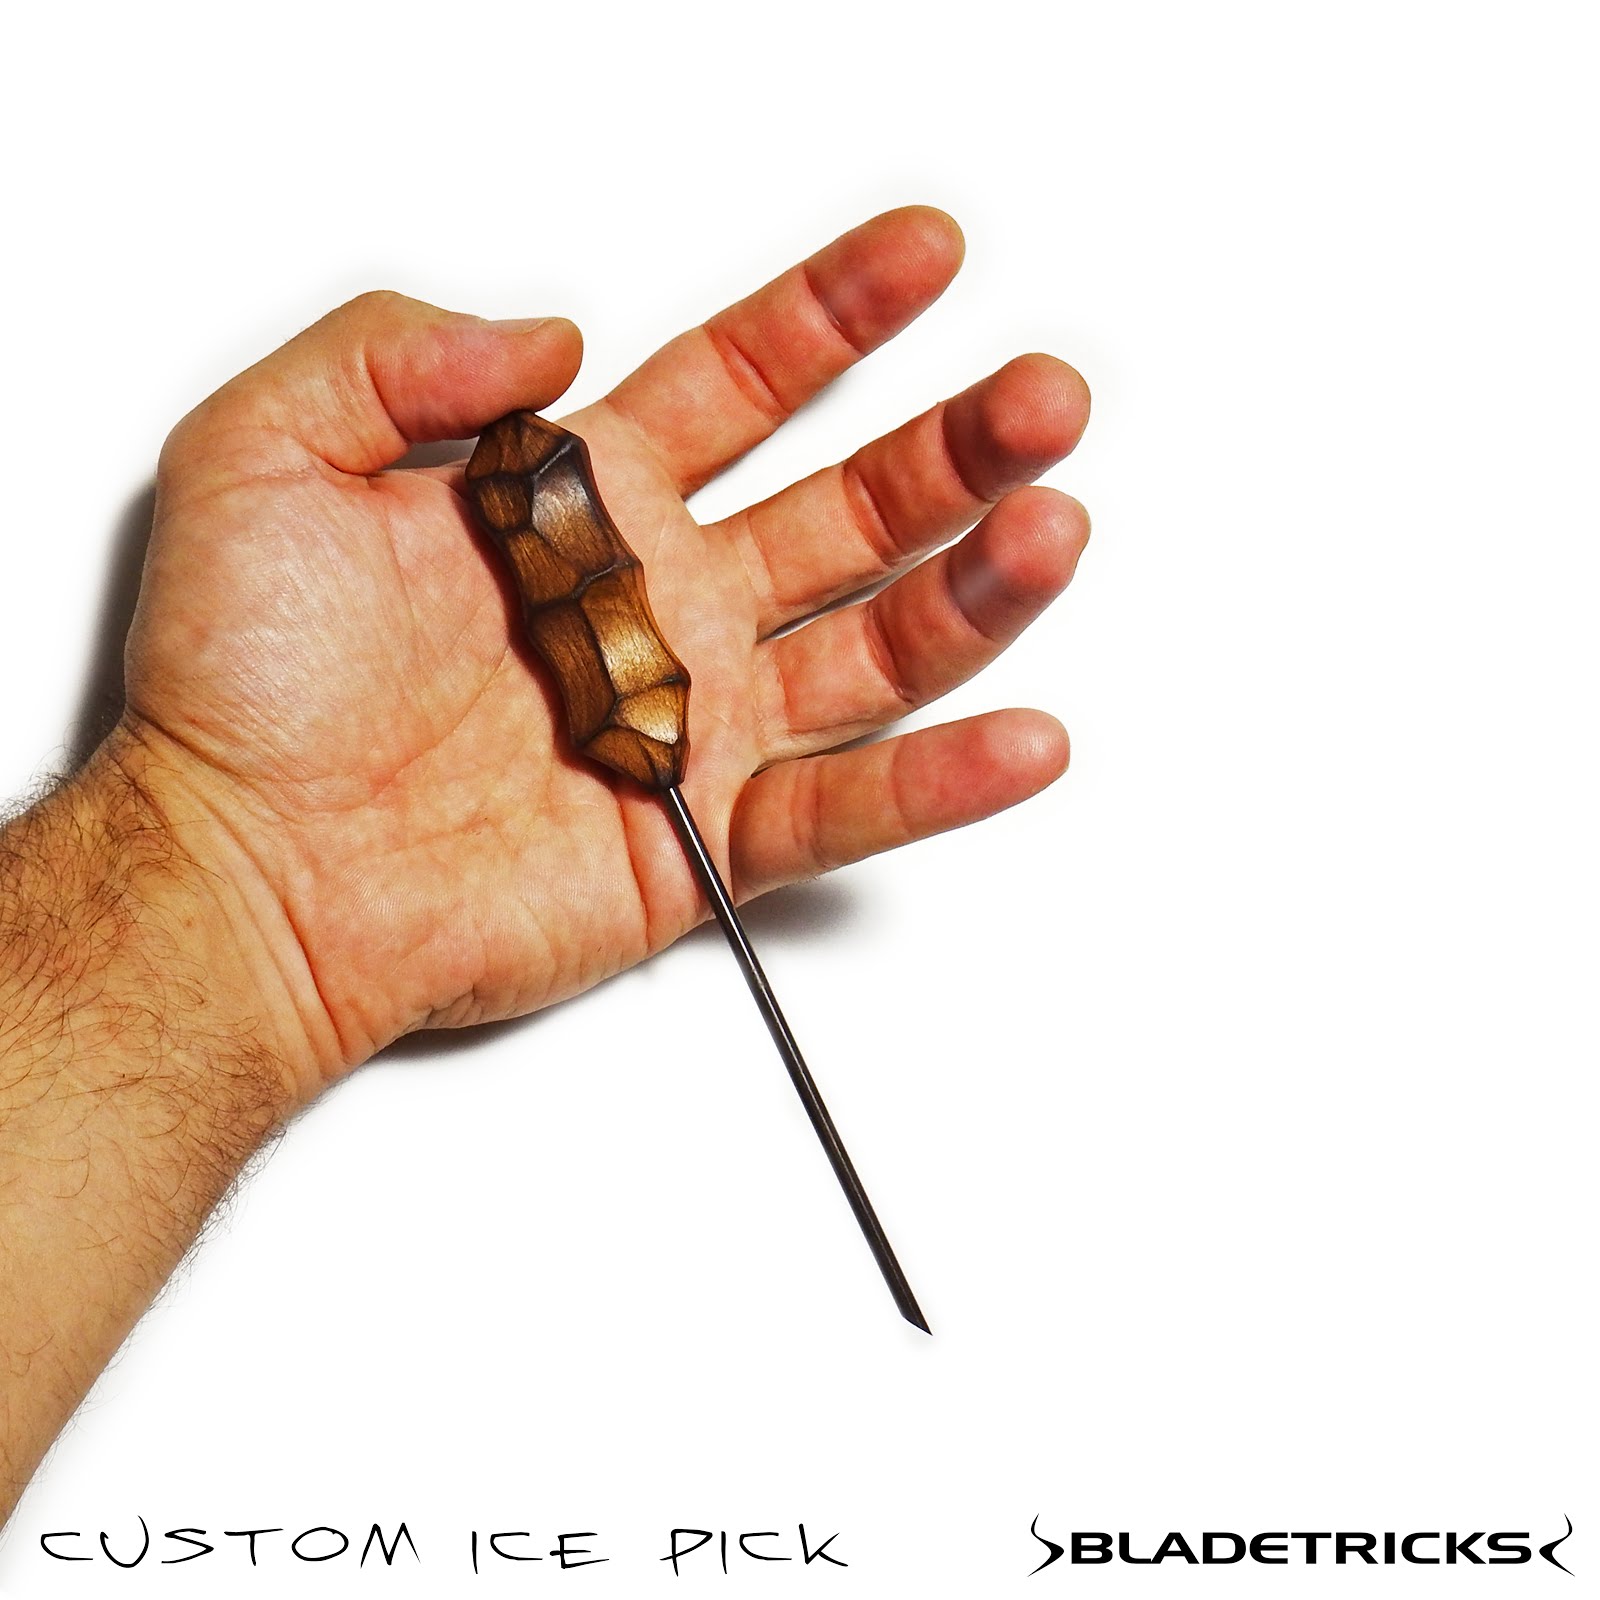 BLADETRICKS: REFRESH YOUR EDC DUMP COCKTAIL, TRY AN ICE PICK